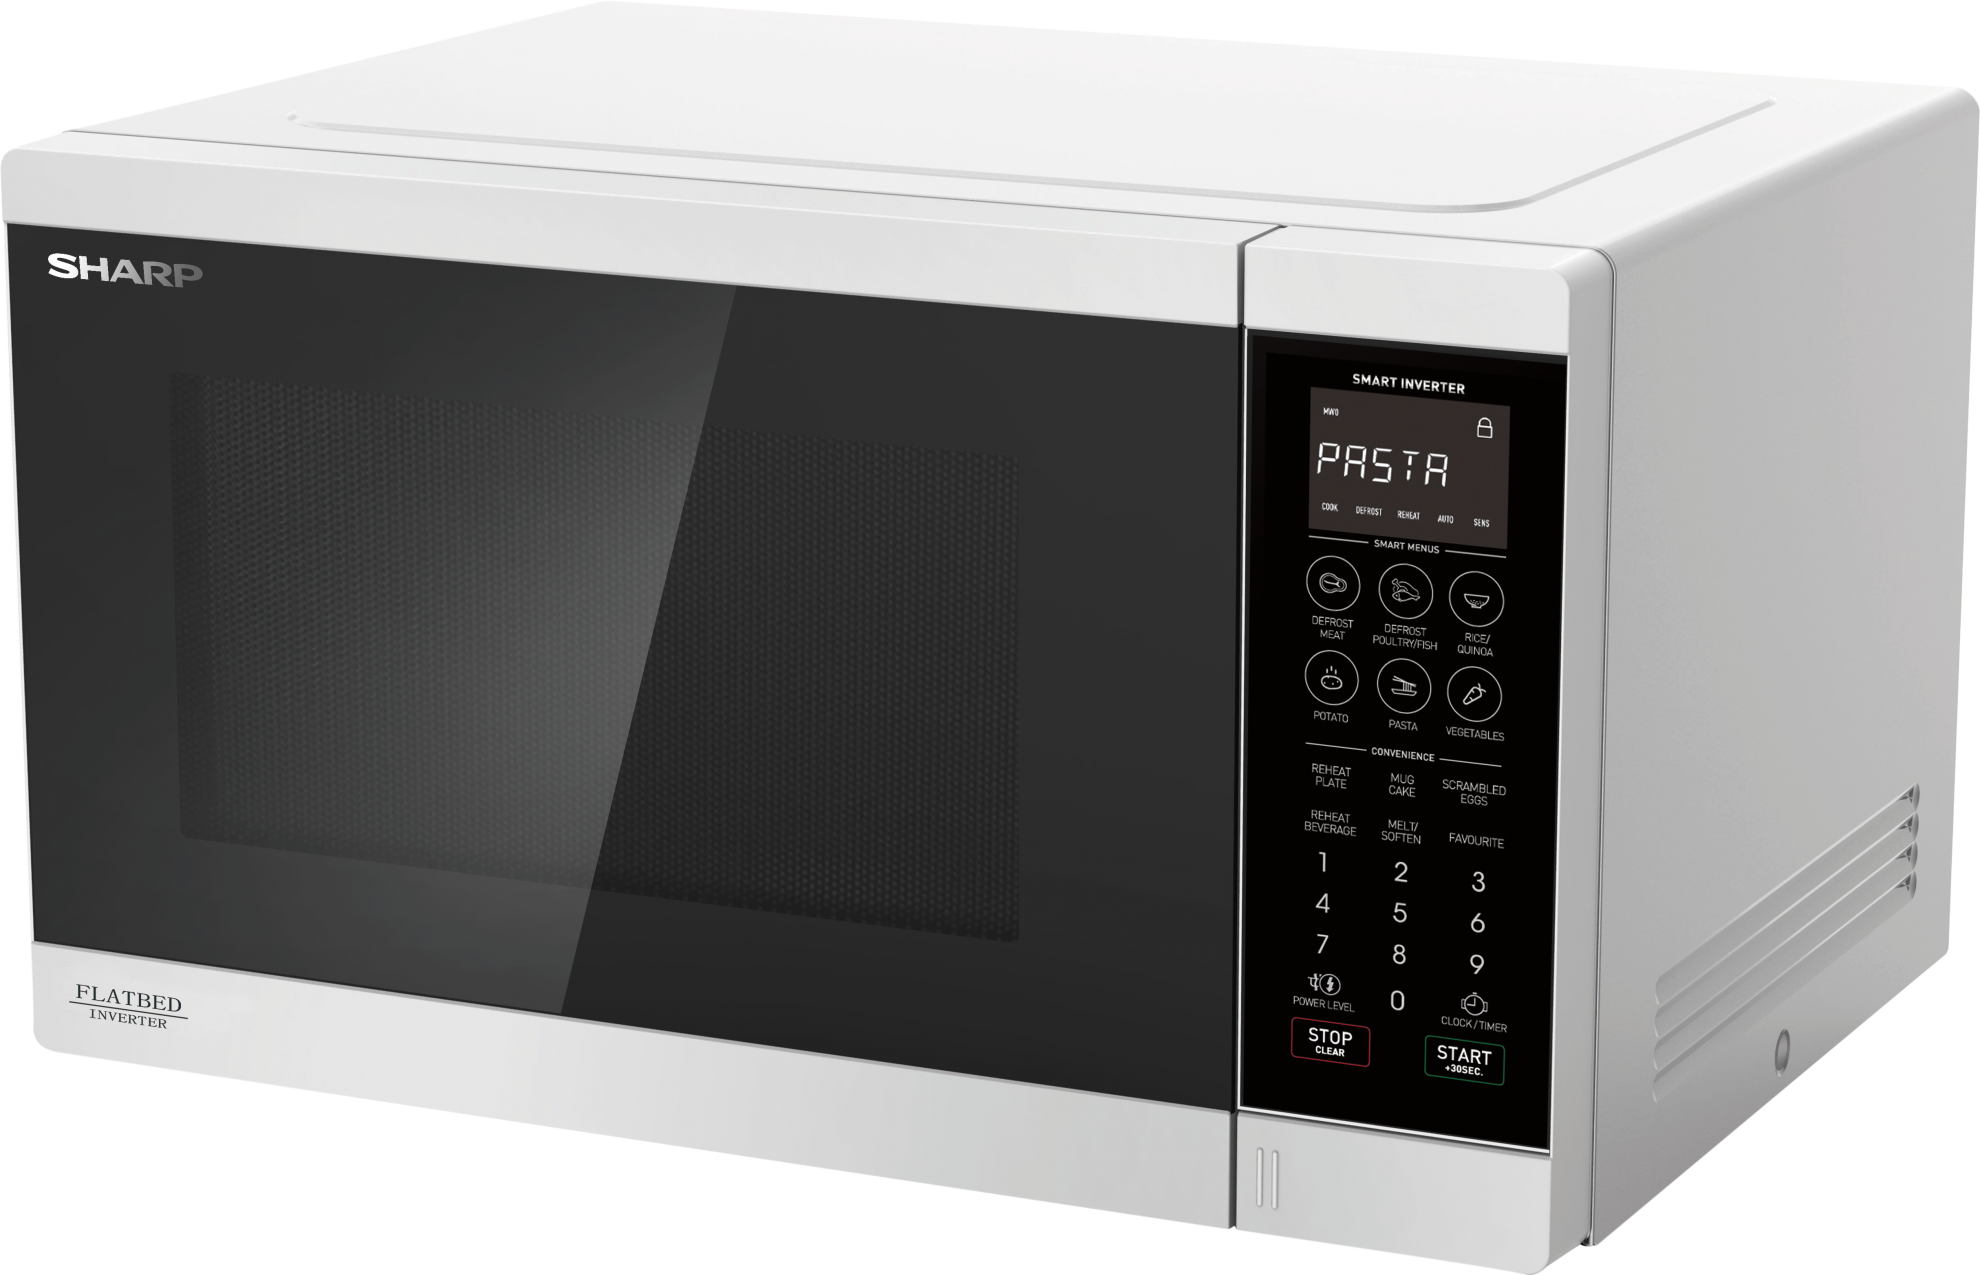 Flatbed Microwave 1200W - White